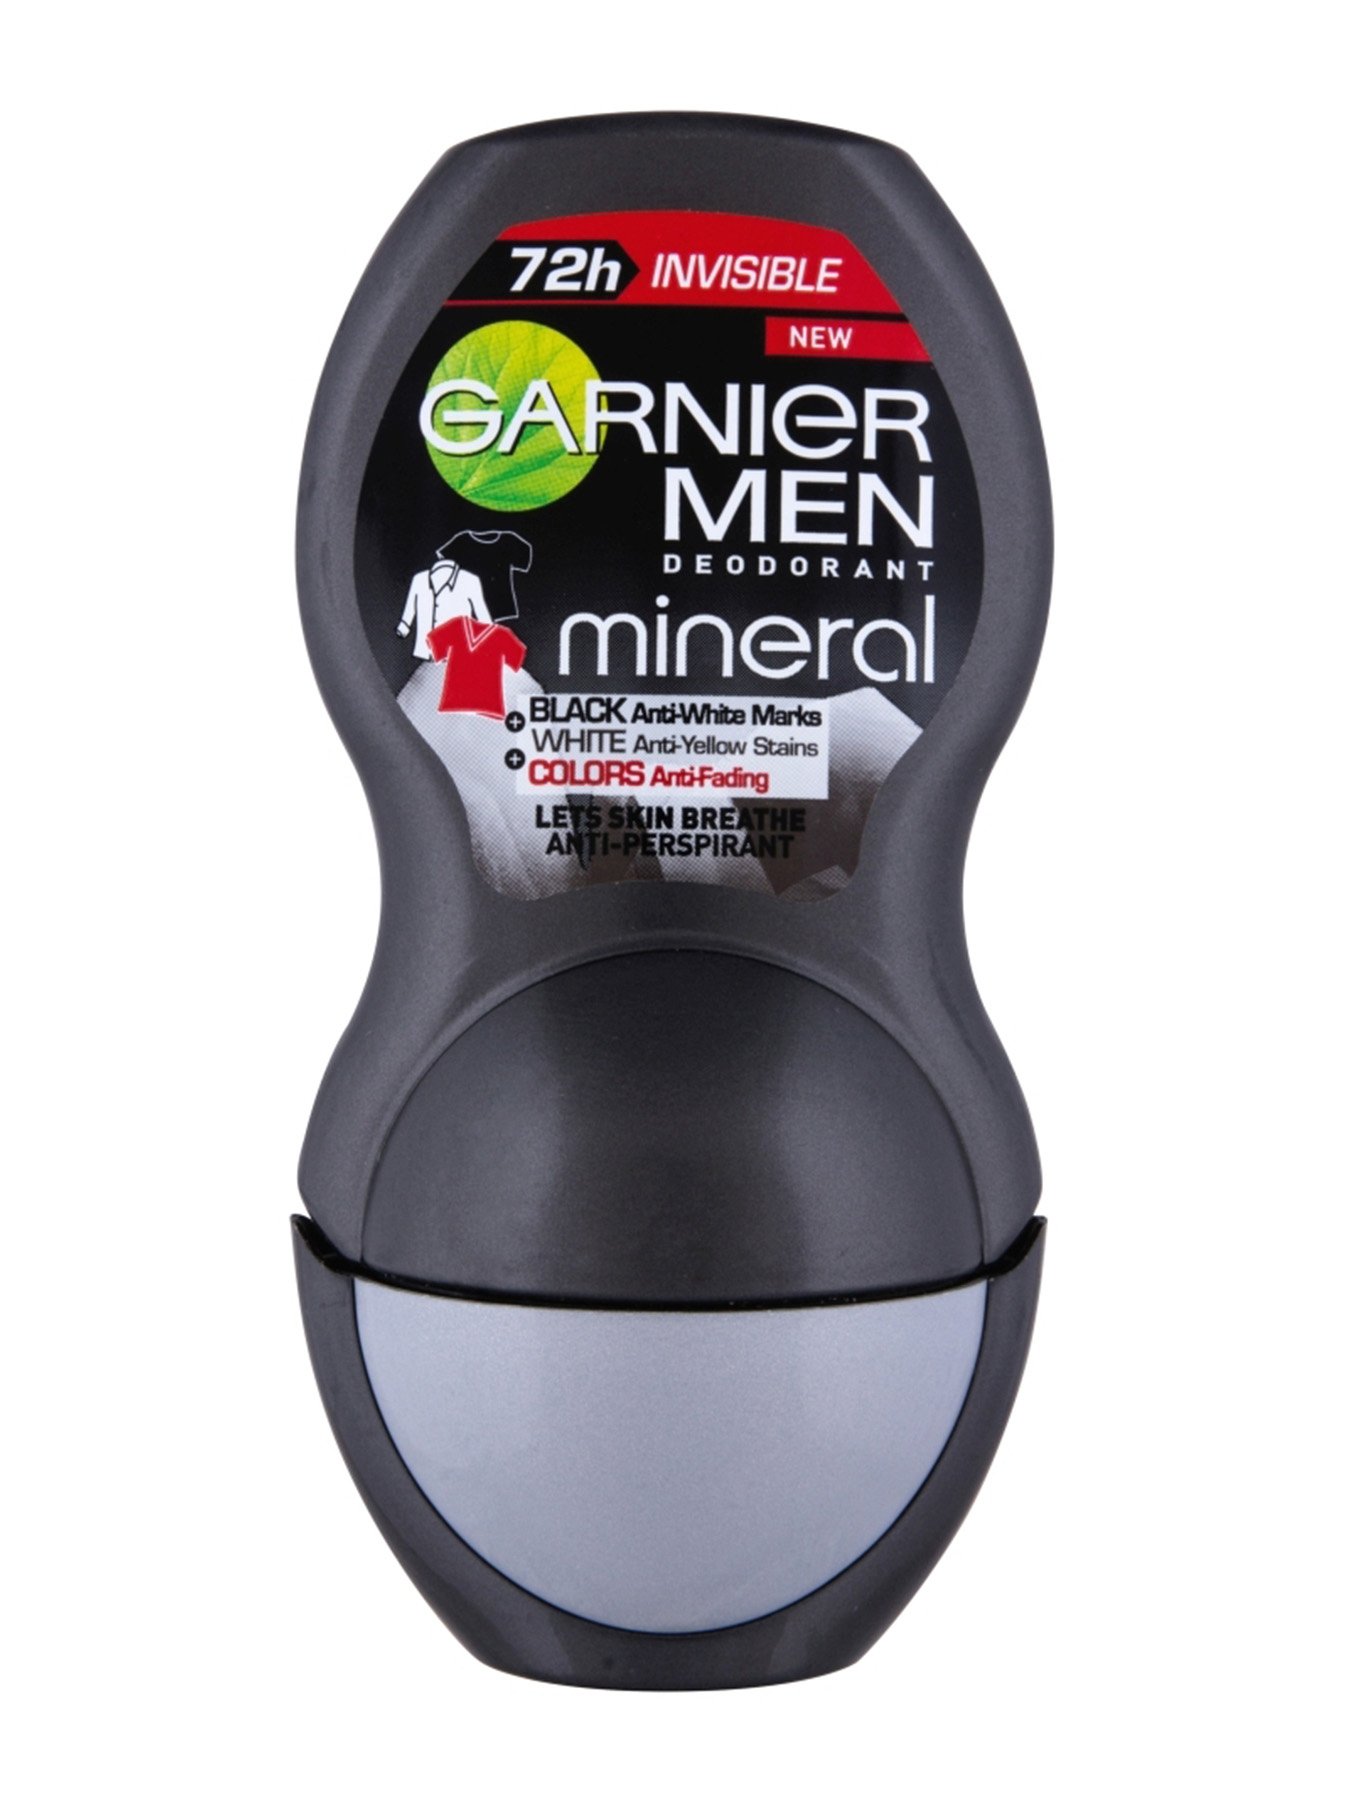 Garnier Mineral Deo Men Invisible Black, White & Colors Roll-on 